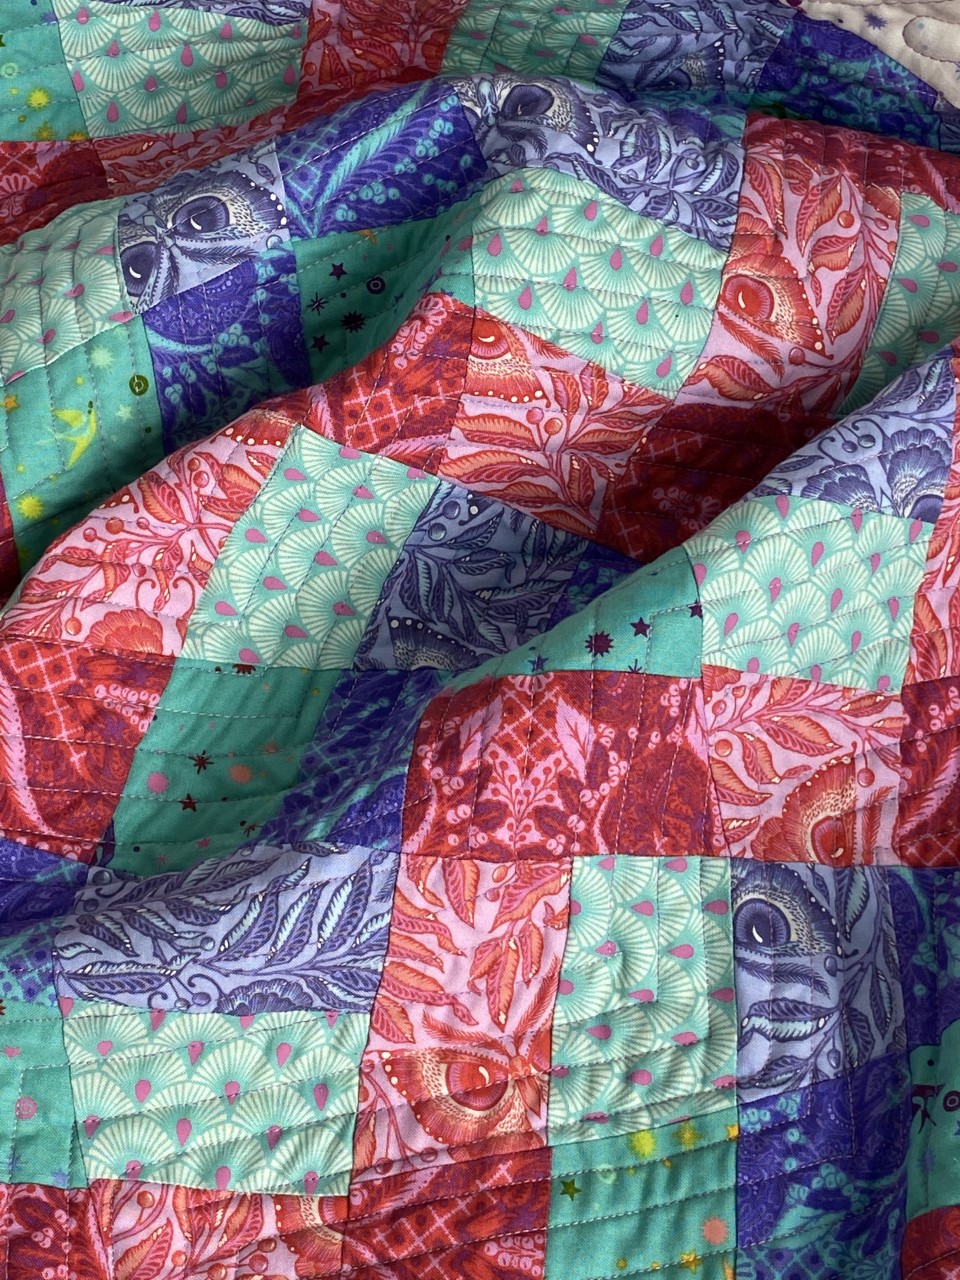 Picking out fabrics for a new quilt can keep you enthused and help to avoid burnout in your crafting time.